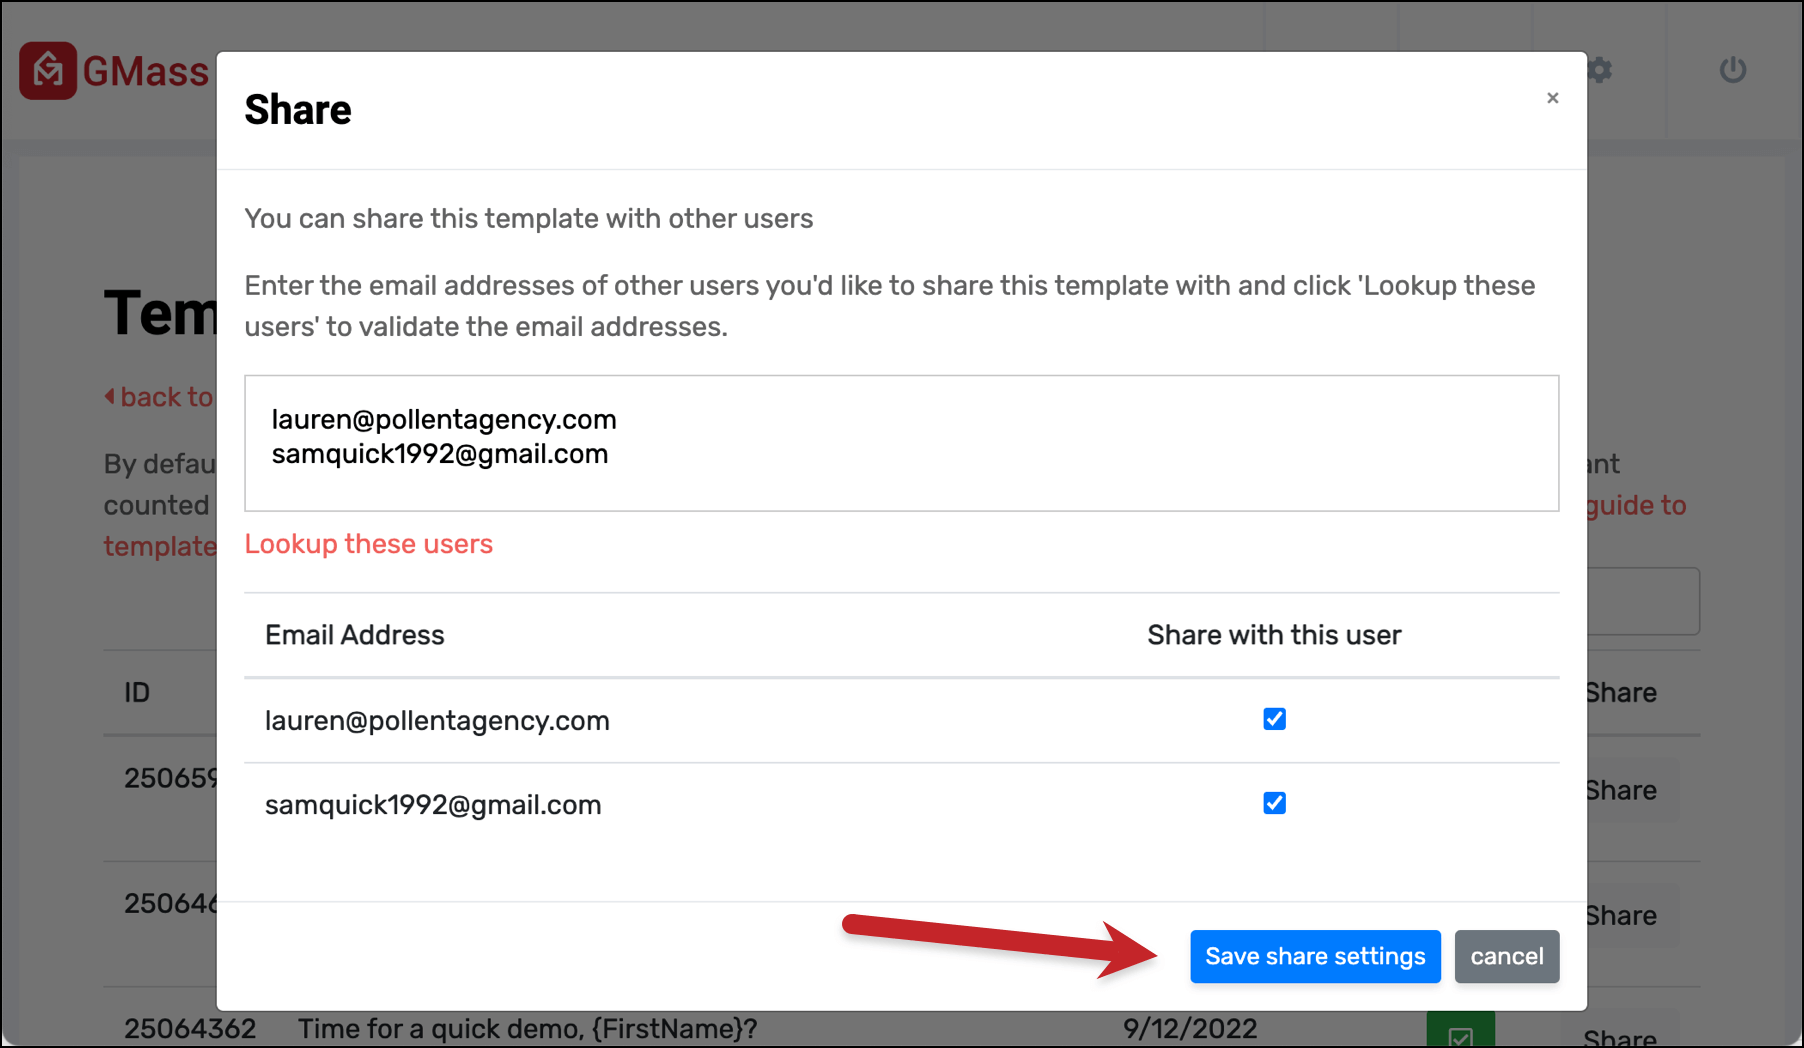 Save your template sharing settings